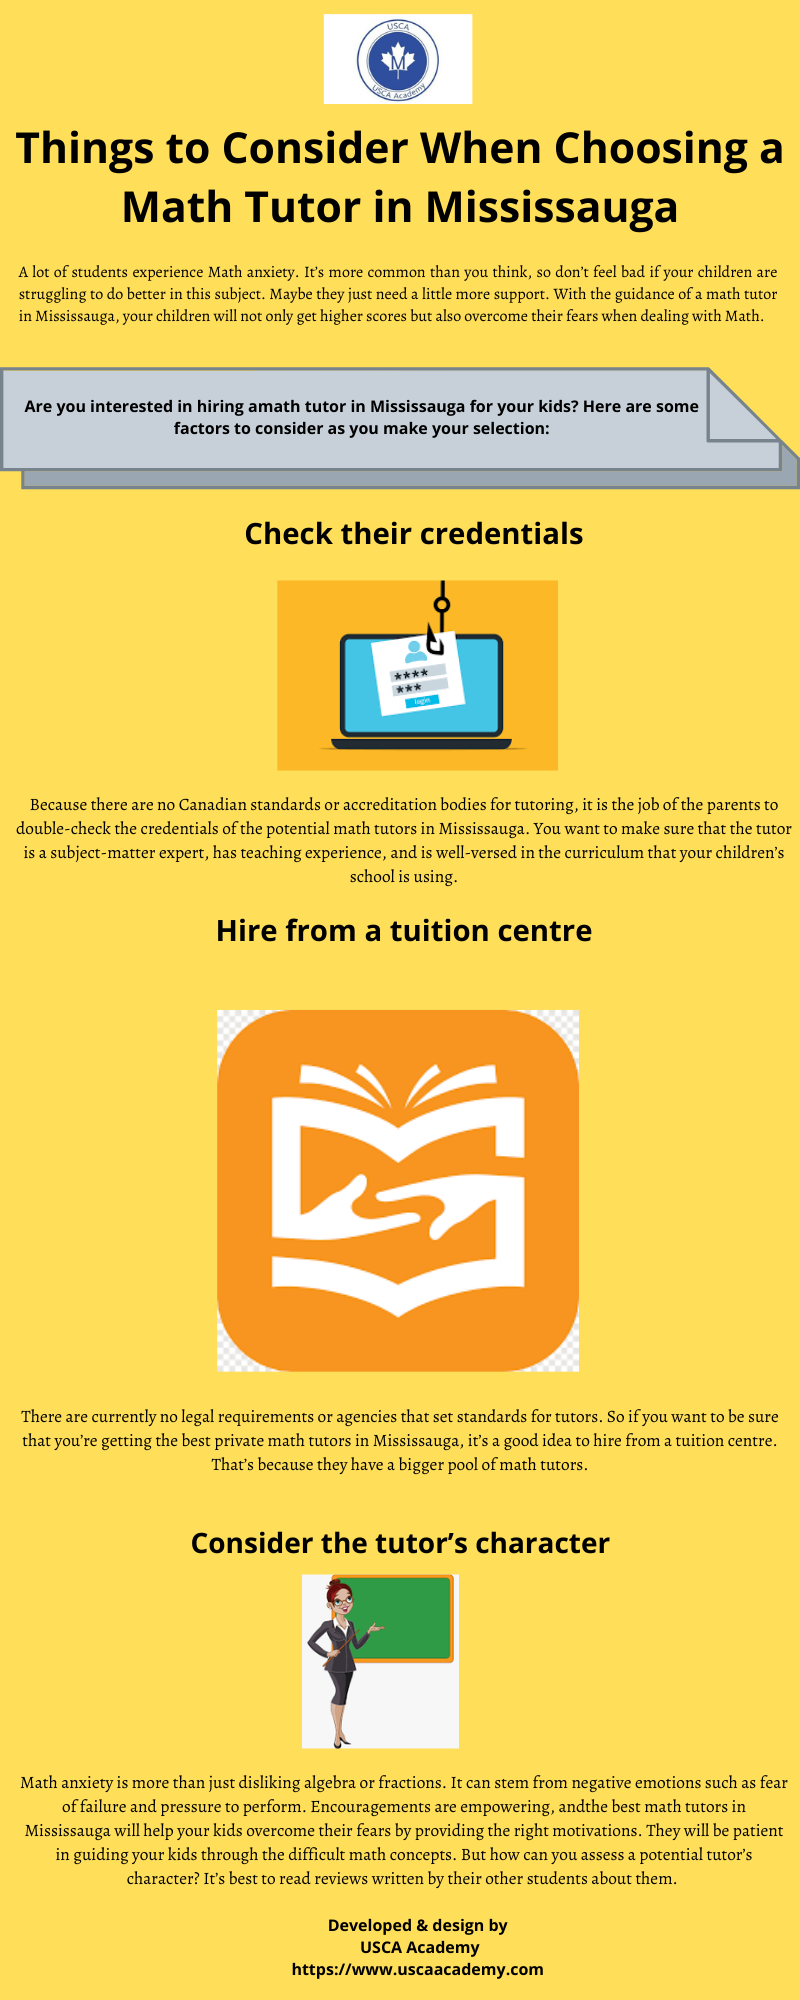 Things to Consider When Choosing a Math Tutor in Mississauga.png  by uscaacademy